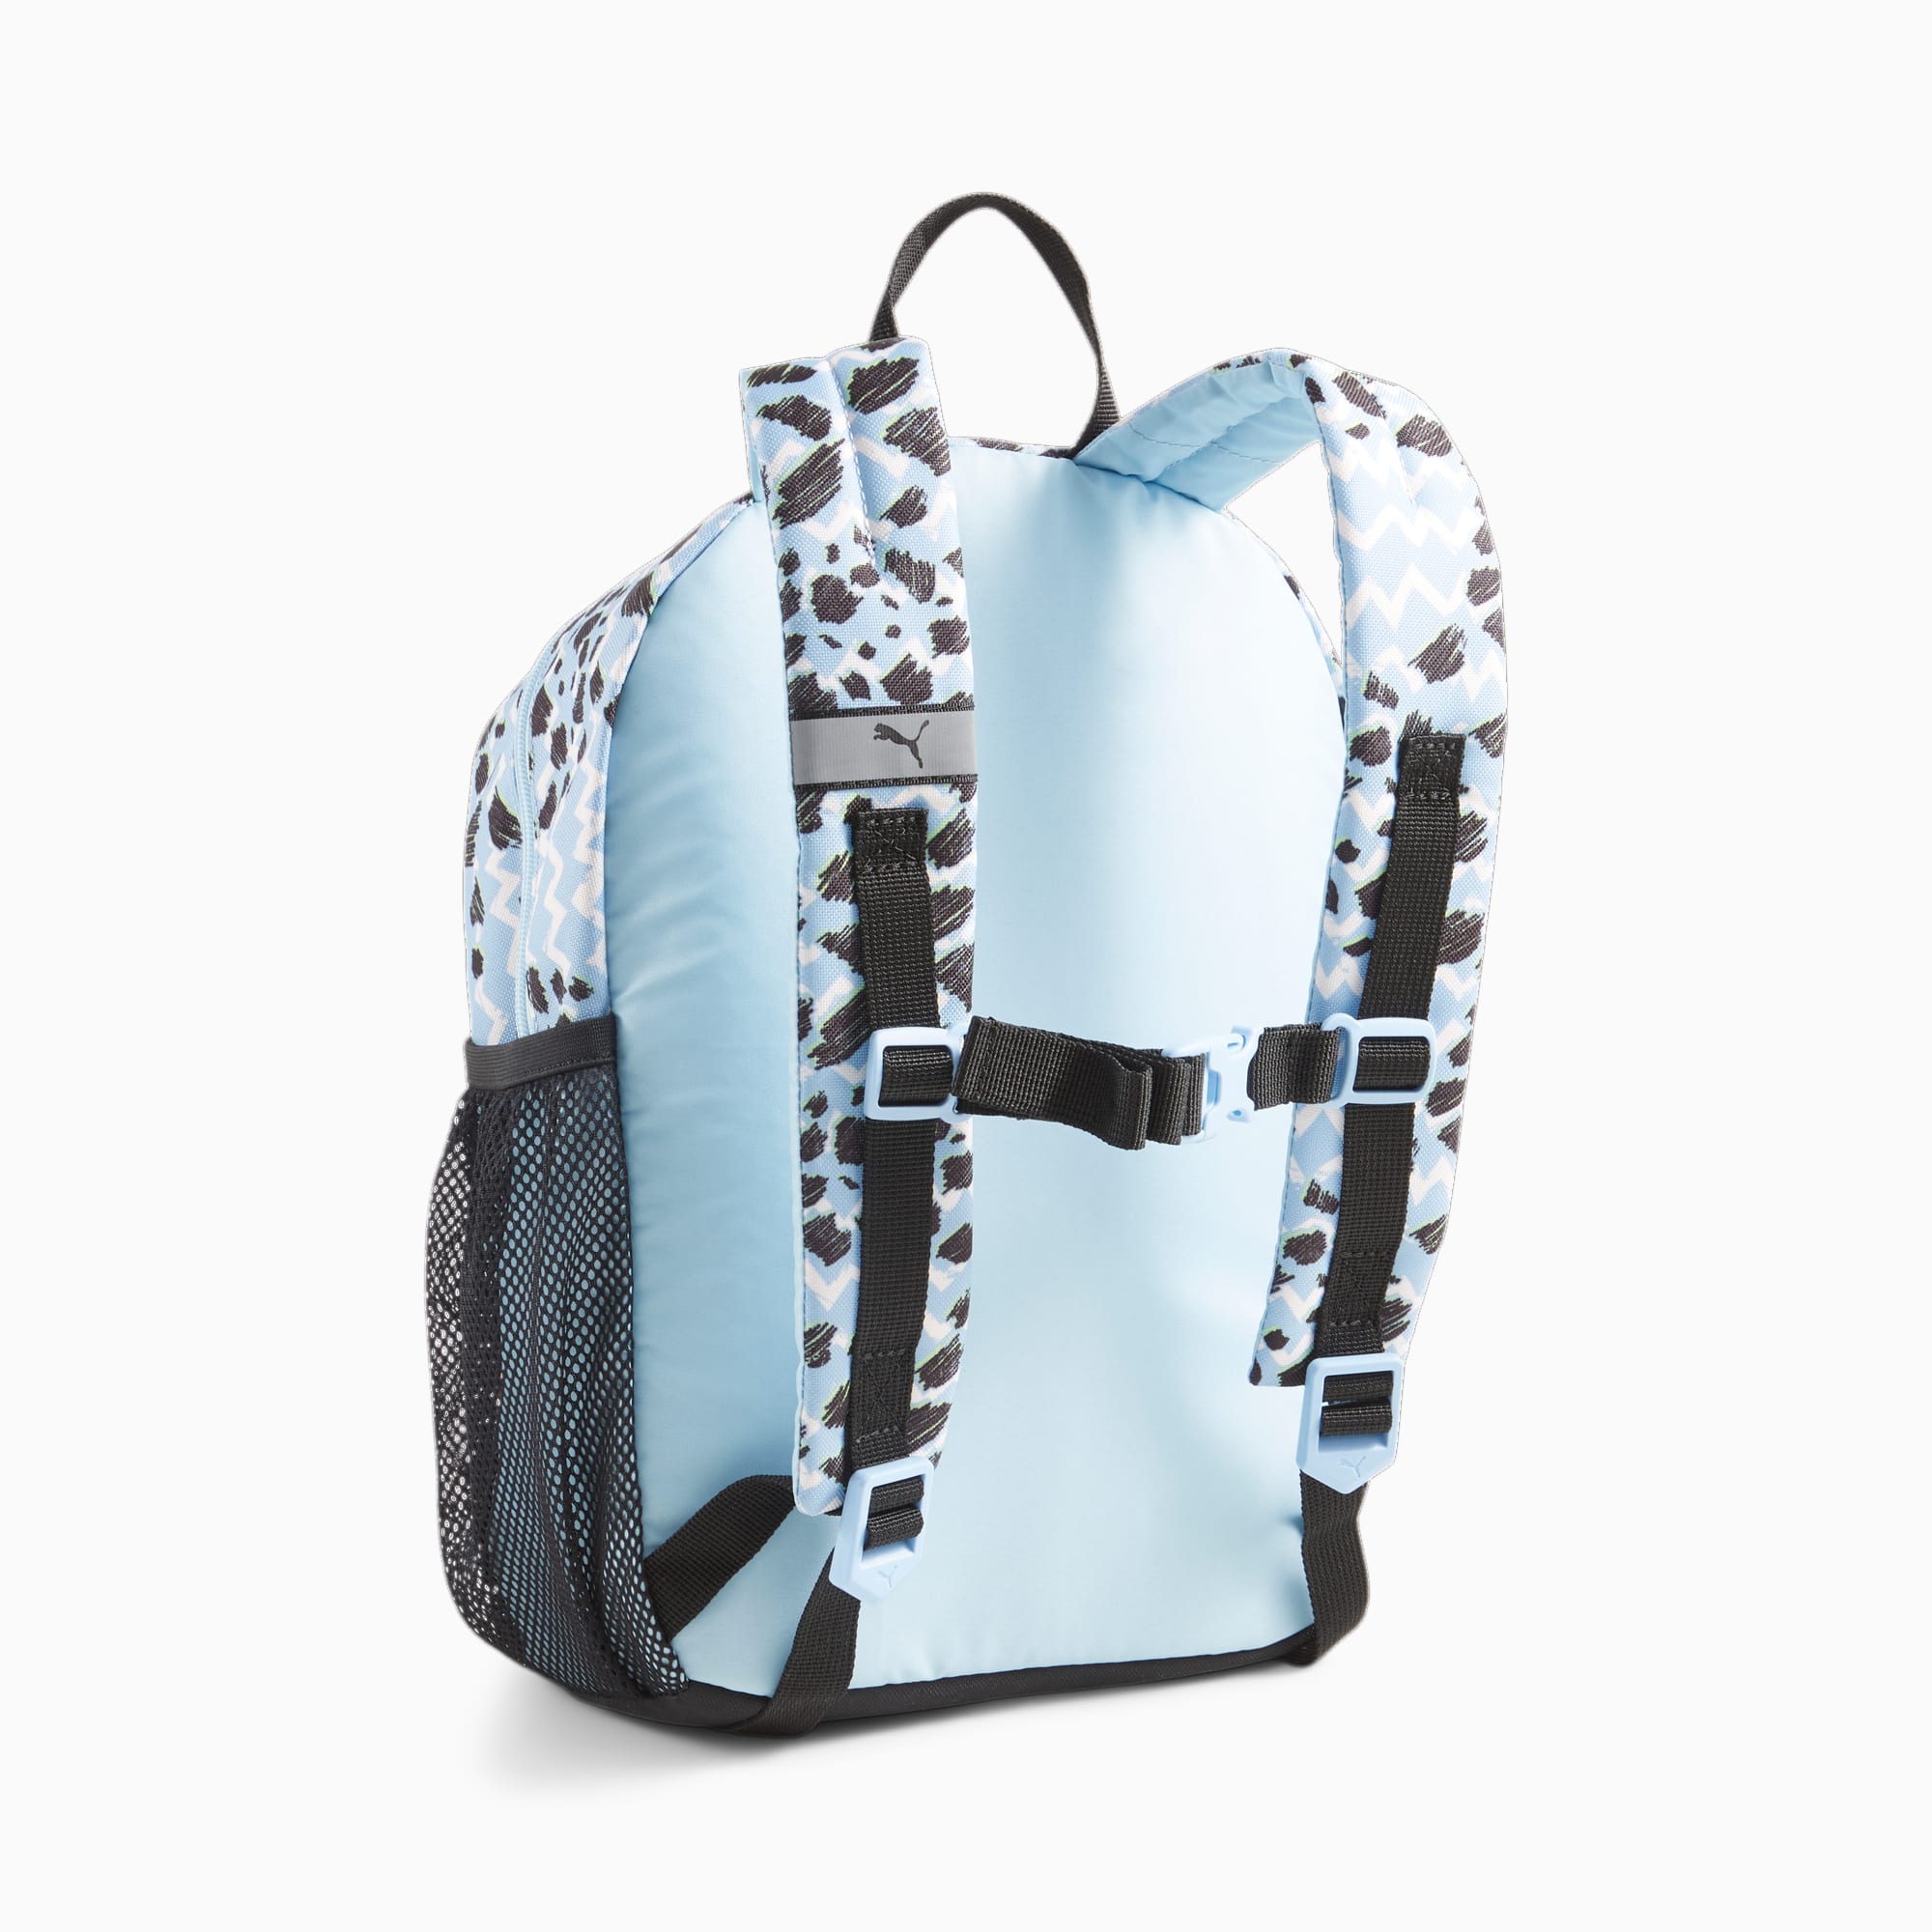 PUMA Mixmatch Youth Backpack, Black/Sky Blue/AOP, Accessories